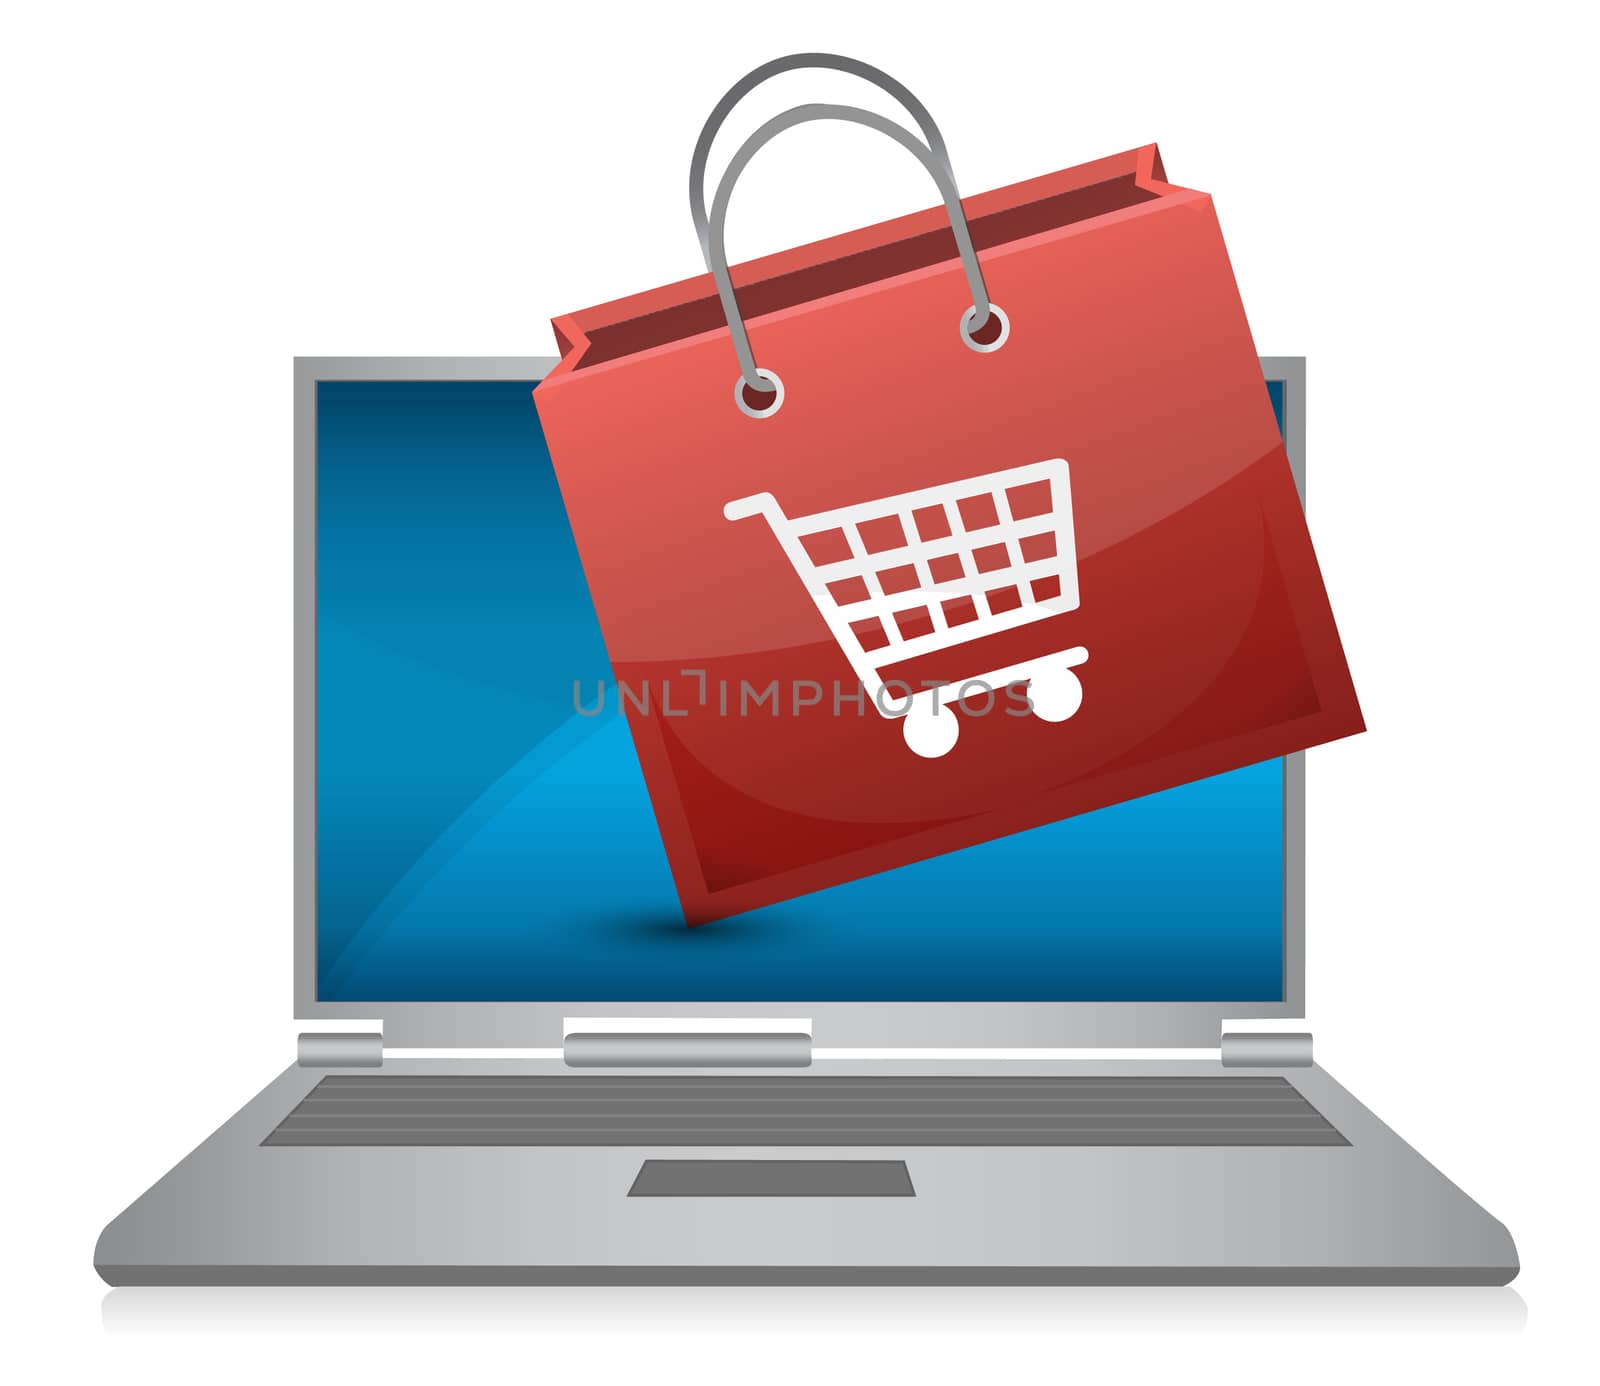 Shopping bag icon coming out of laptop screen